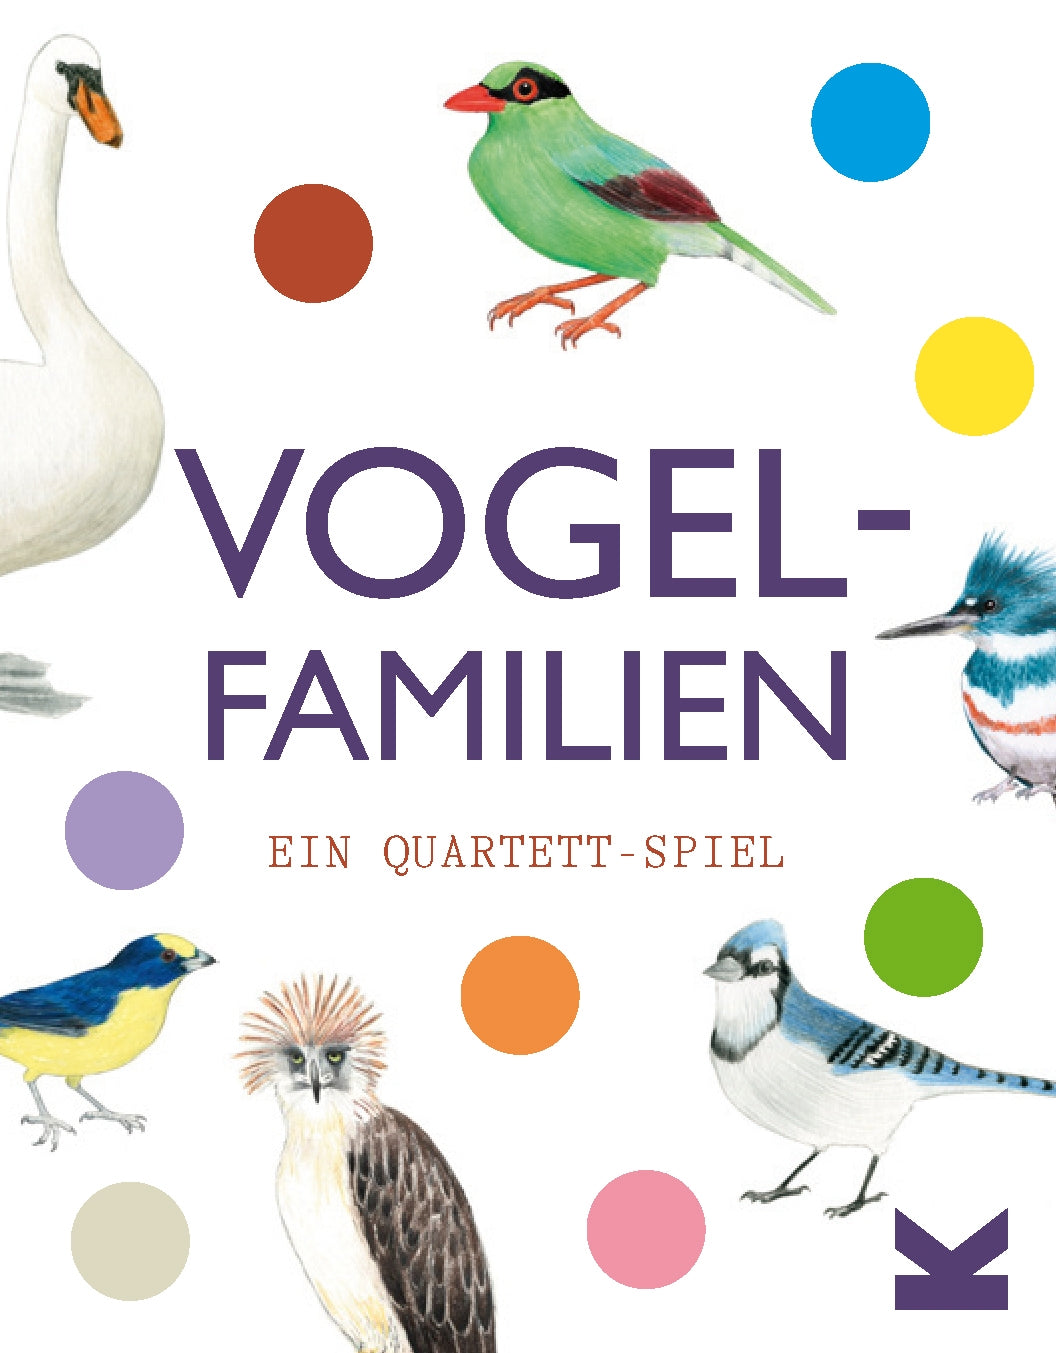 Vogel-Familien by Christine Berrie, Sarah Pasquay, Mike Unwin